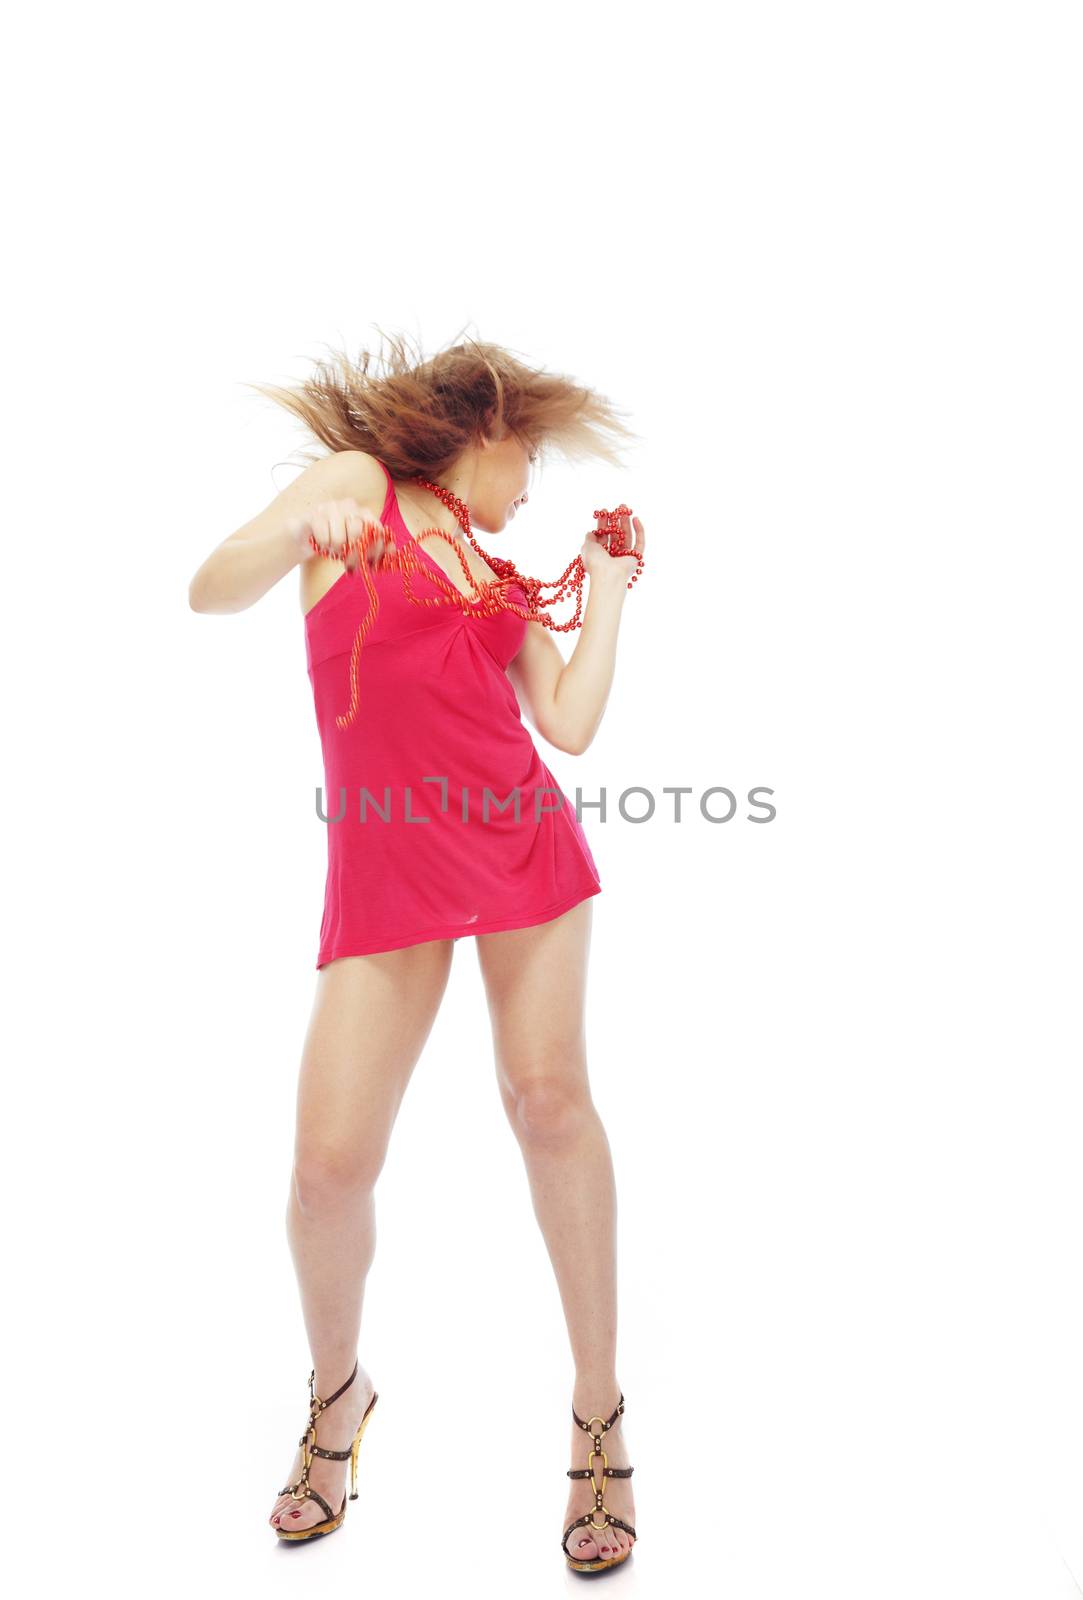 Dancing lady in the red dress on a white background